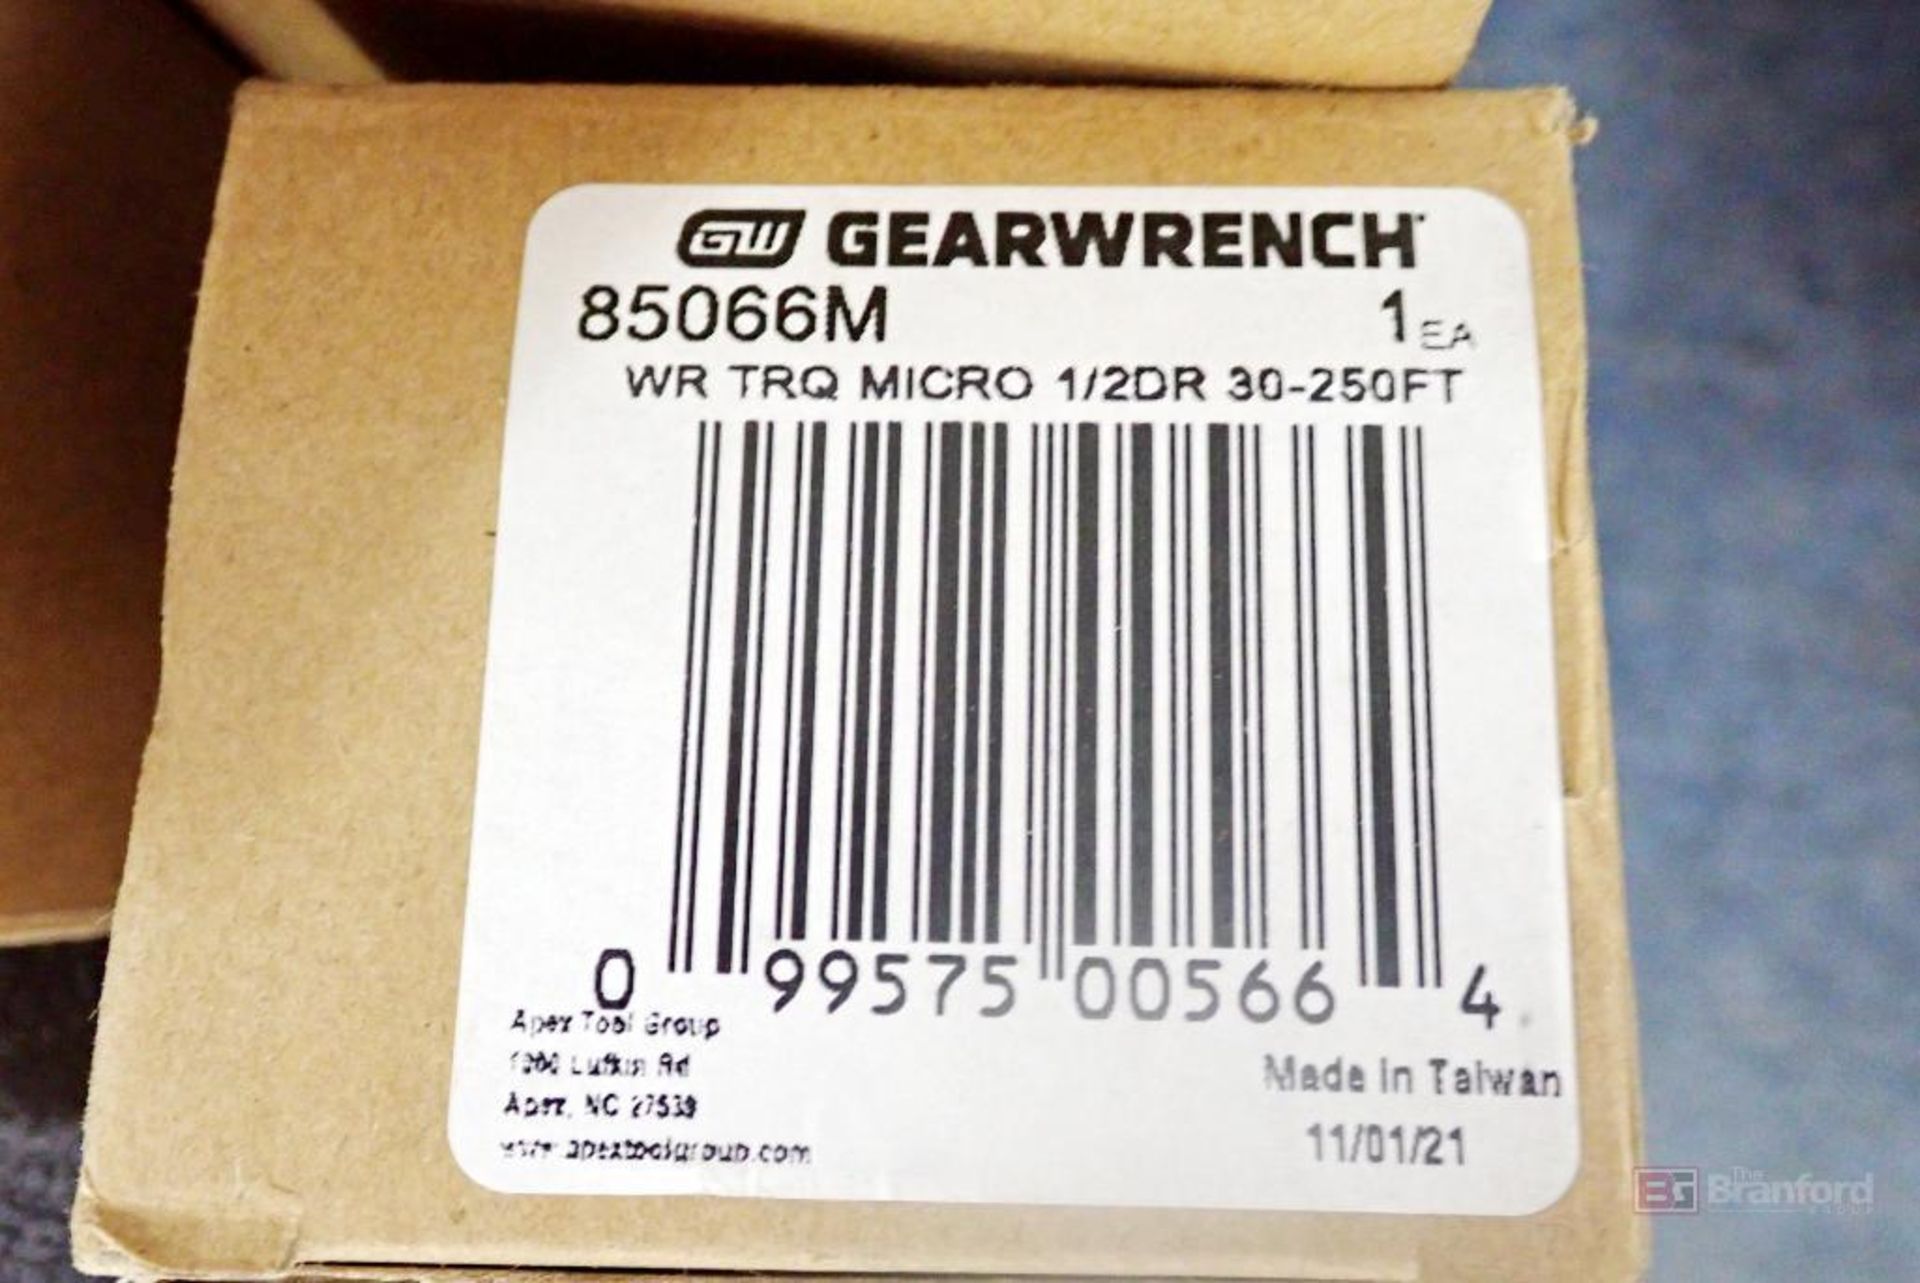 GearWrench 85066M (8612115) 1/2" Drive Micrometer Torque Wrench - Bild 3 aus 5